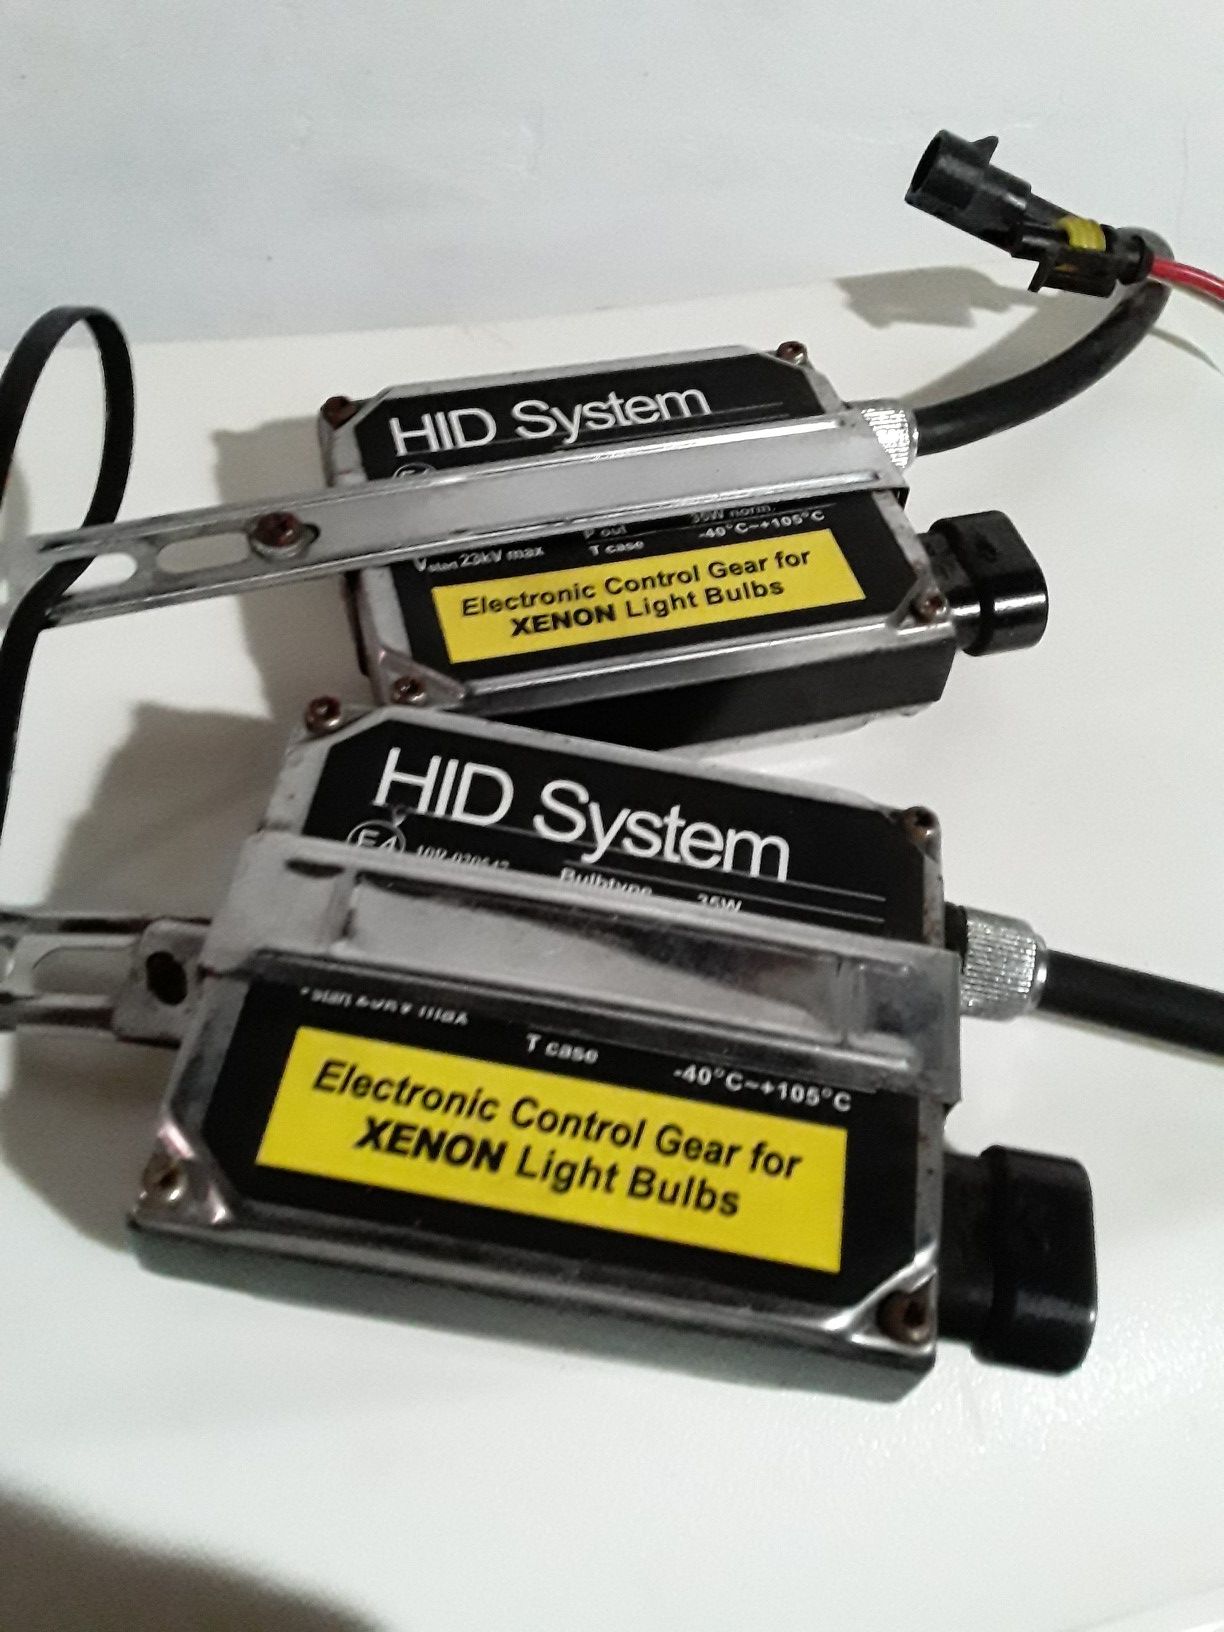 HID SYSTEM CONNECTORS HEADLIGHTS